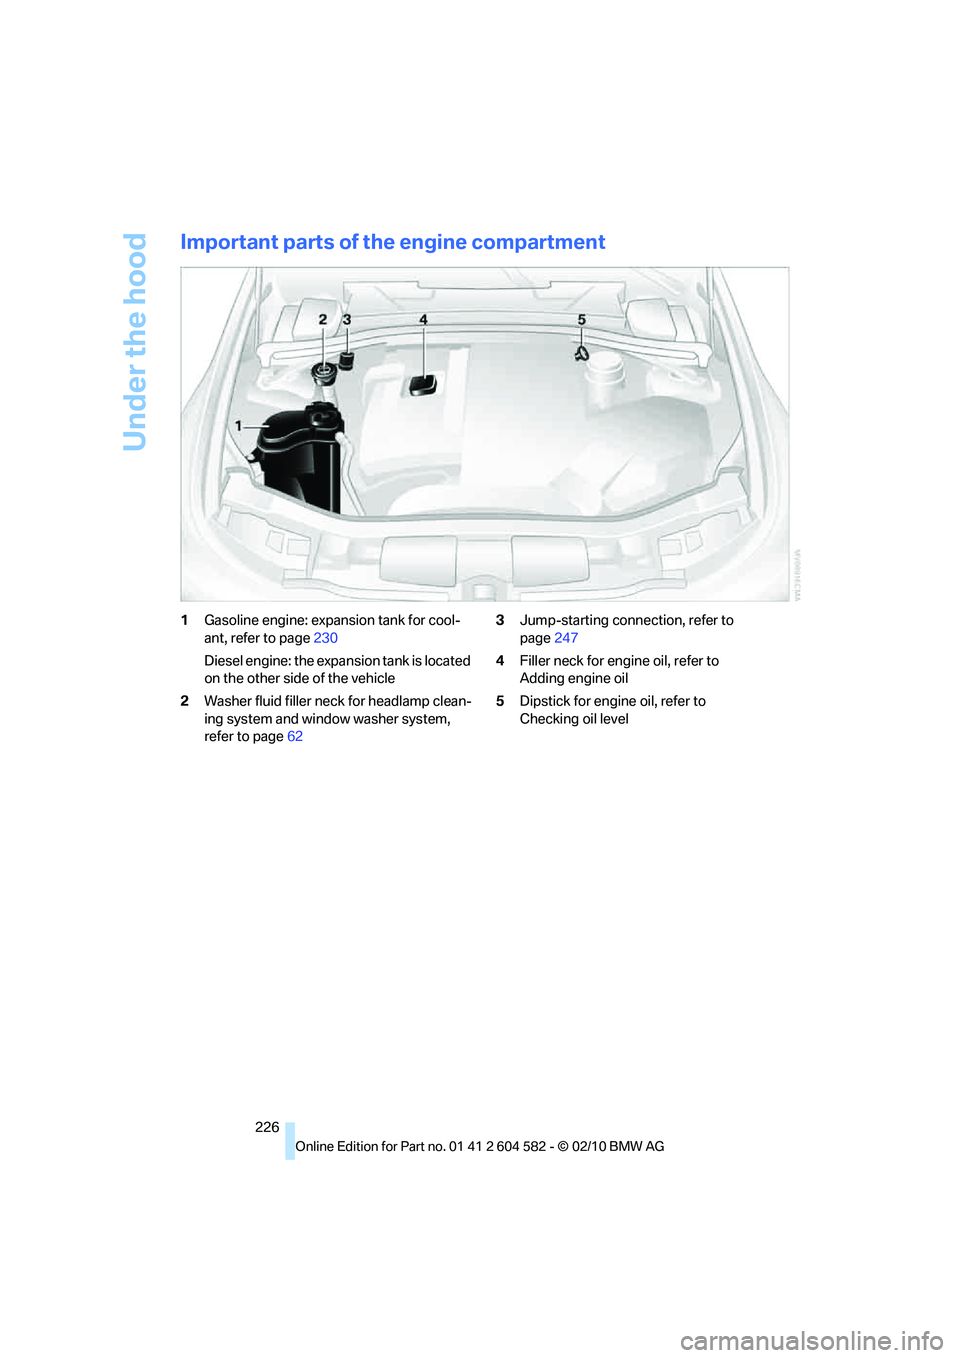 BMW 335I XDRIVE 2011  Owners Manual Under the hood
226
Important parts of the engine compartment
1Gasoline engine: expansion tank for cool-
ant, refer to page230
Diesel engine: the expansion tank is located 
on the other side of the veh